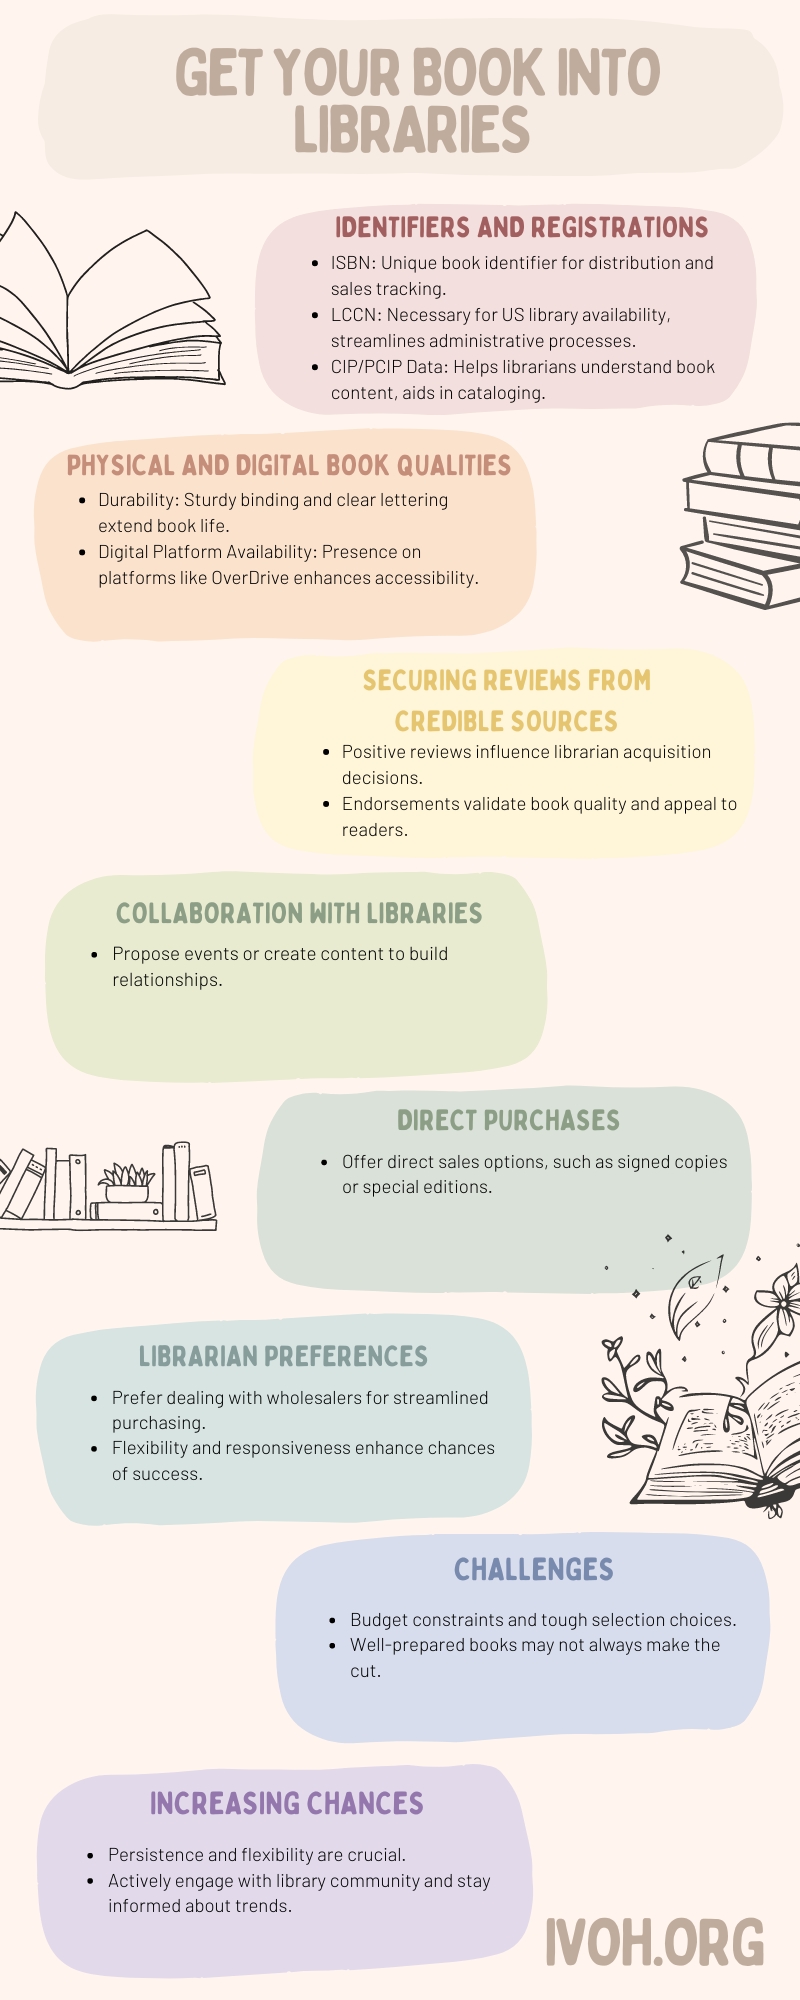 Guide to Get Your Book into Libraries Infographic